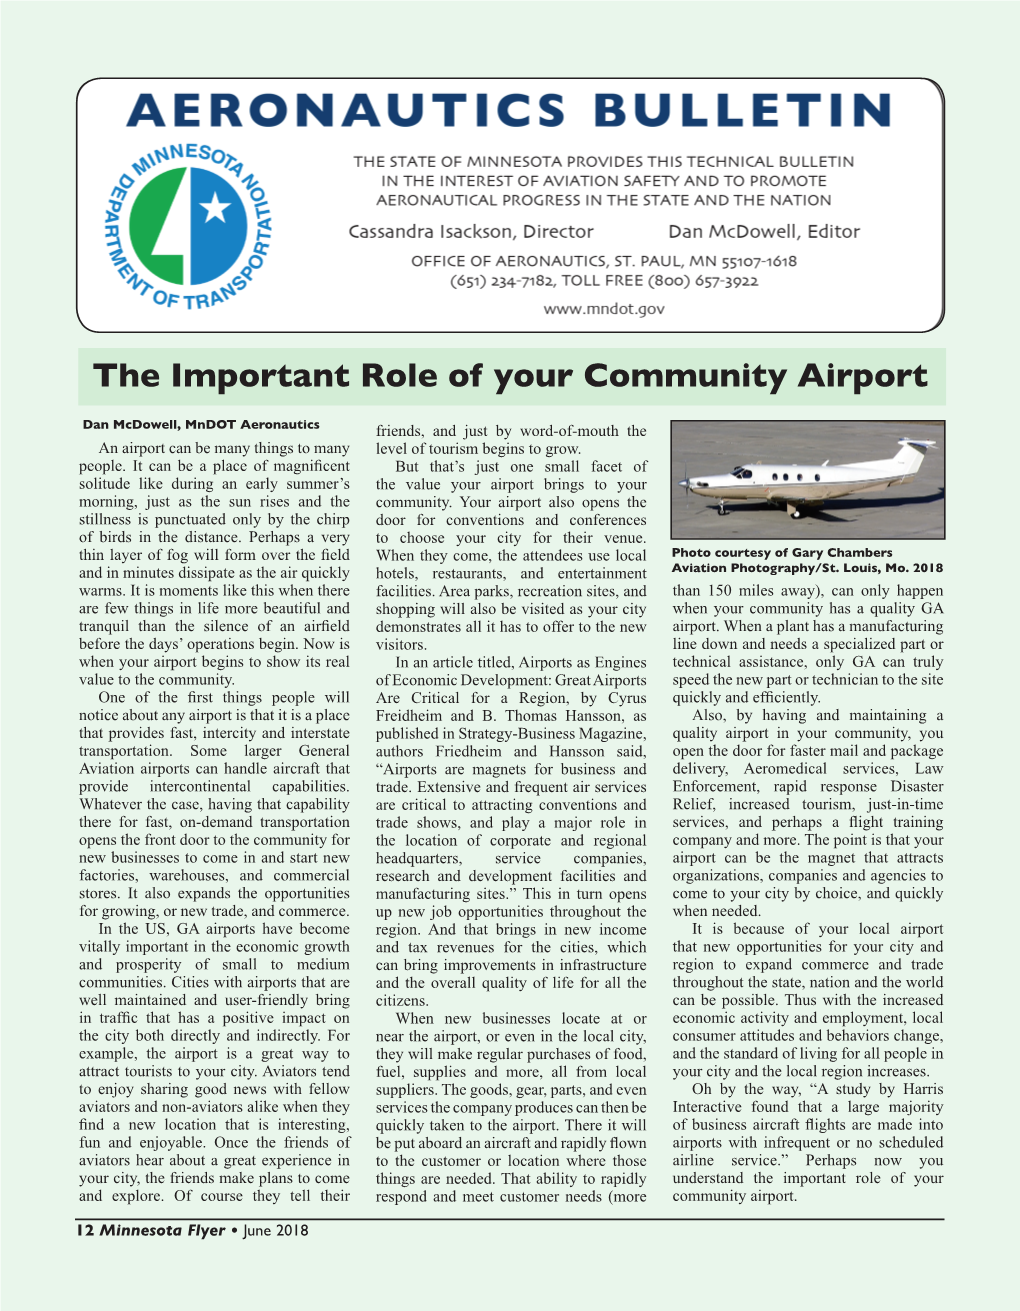 The Important Role of Your Community Airport